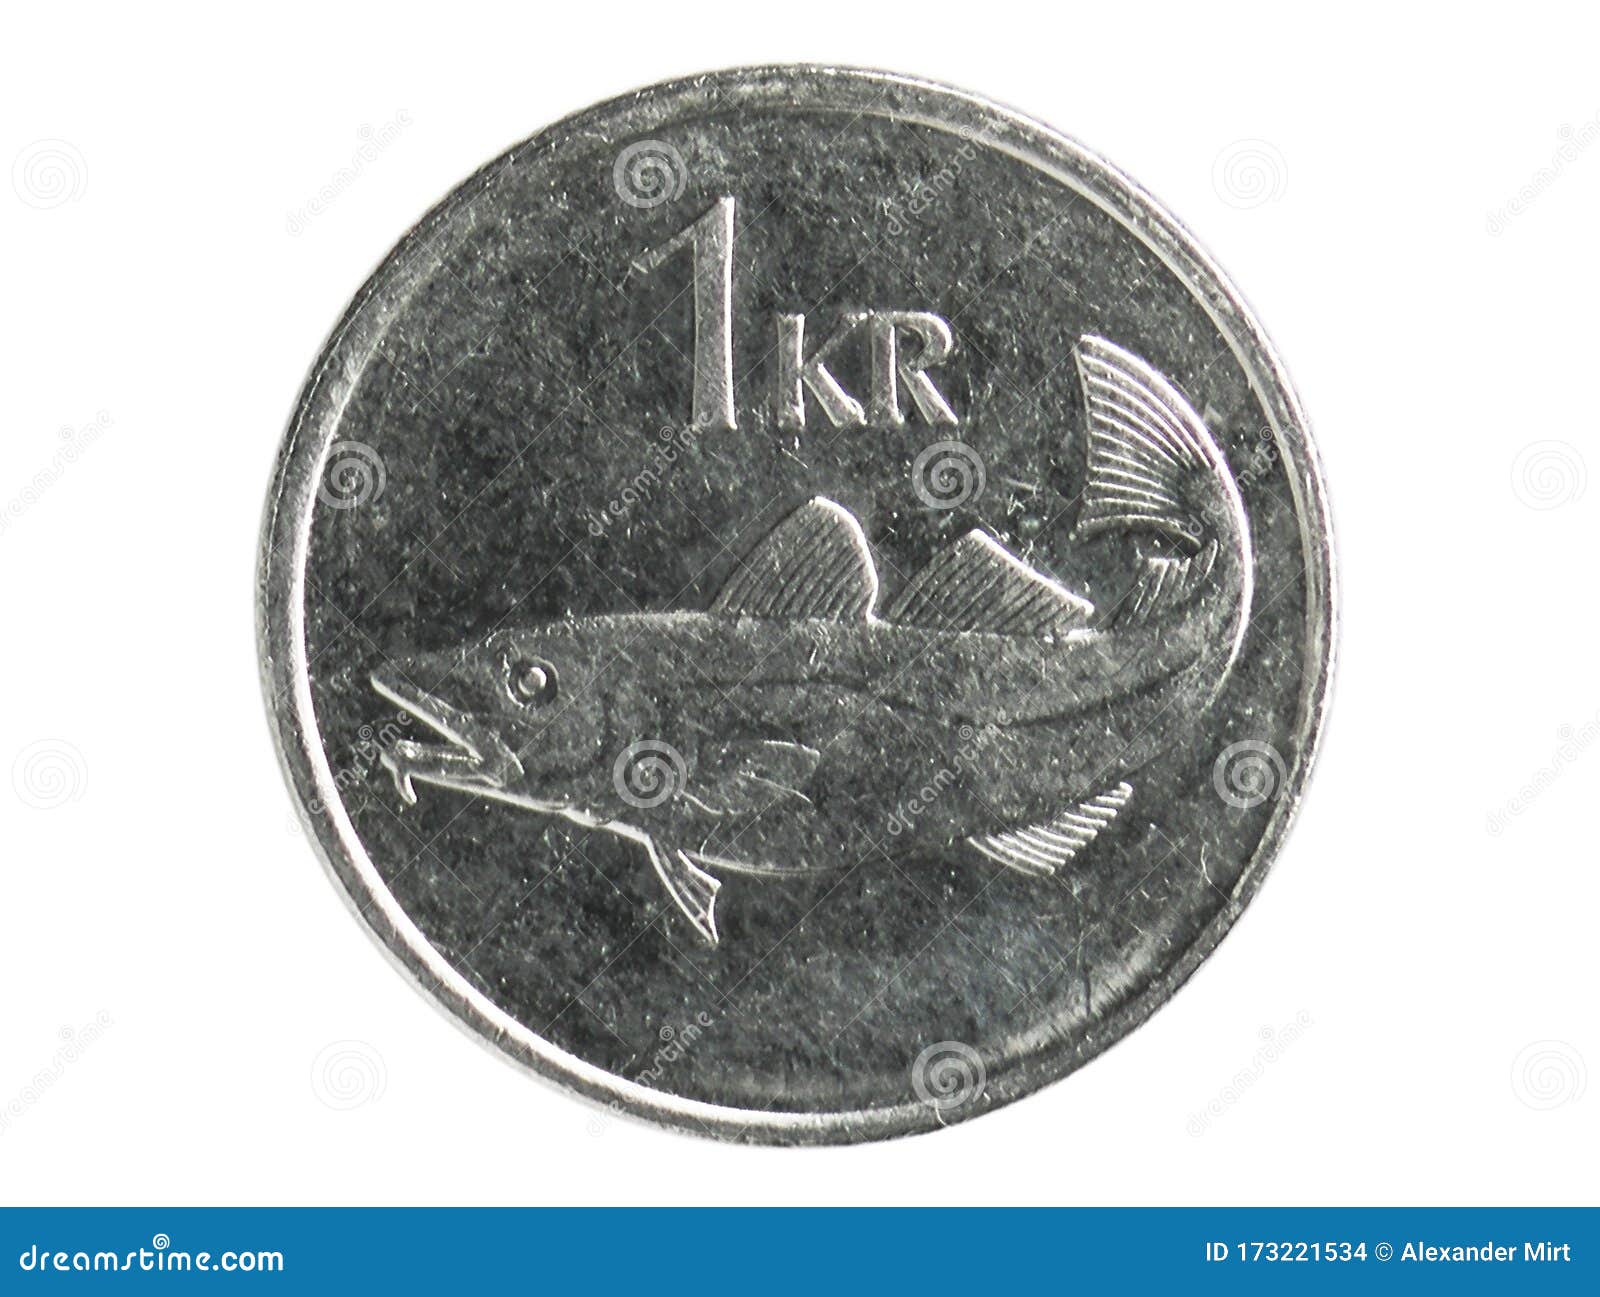 1 krona cod coin, 1980~today - new krona - circulation serie, bank of iceland. obverse, 1999